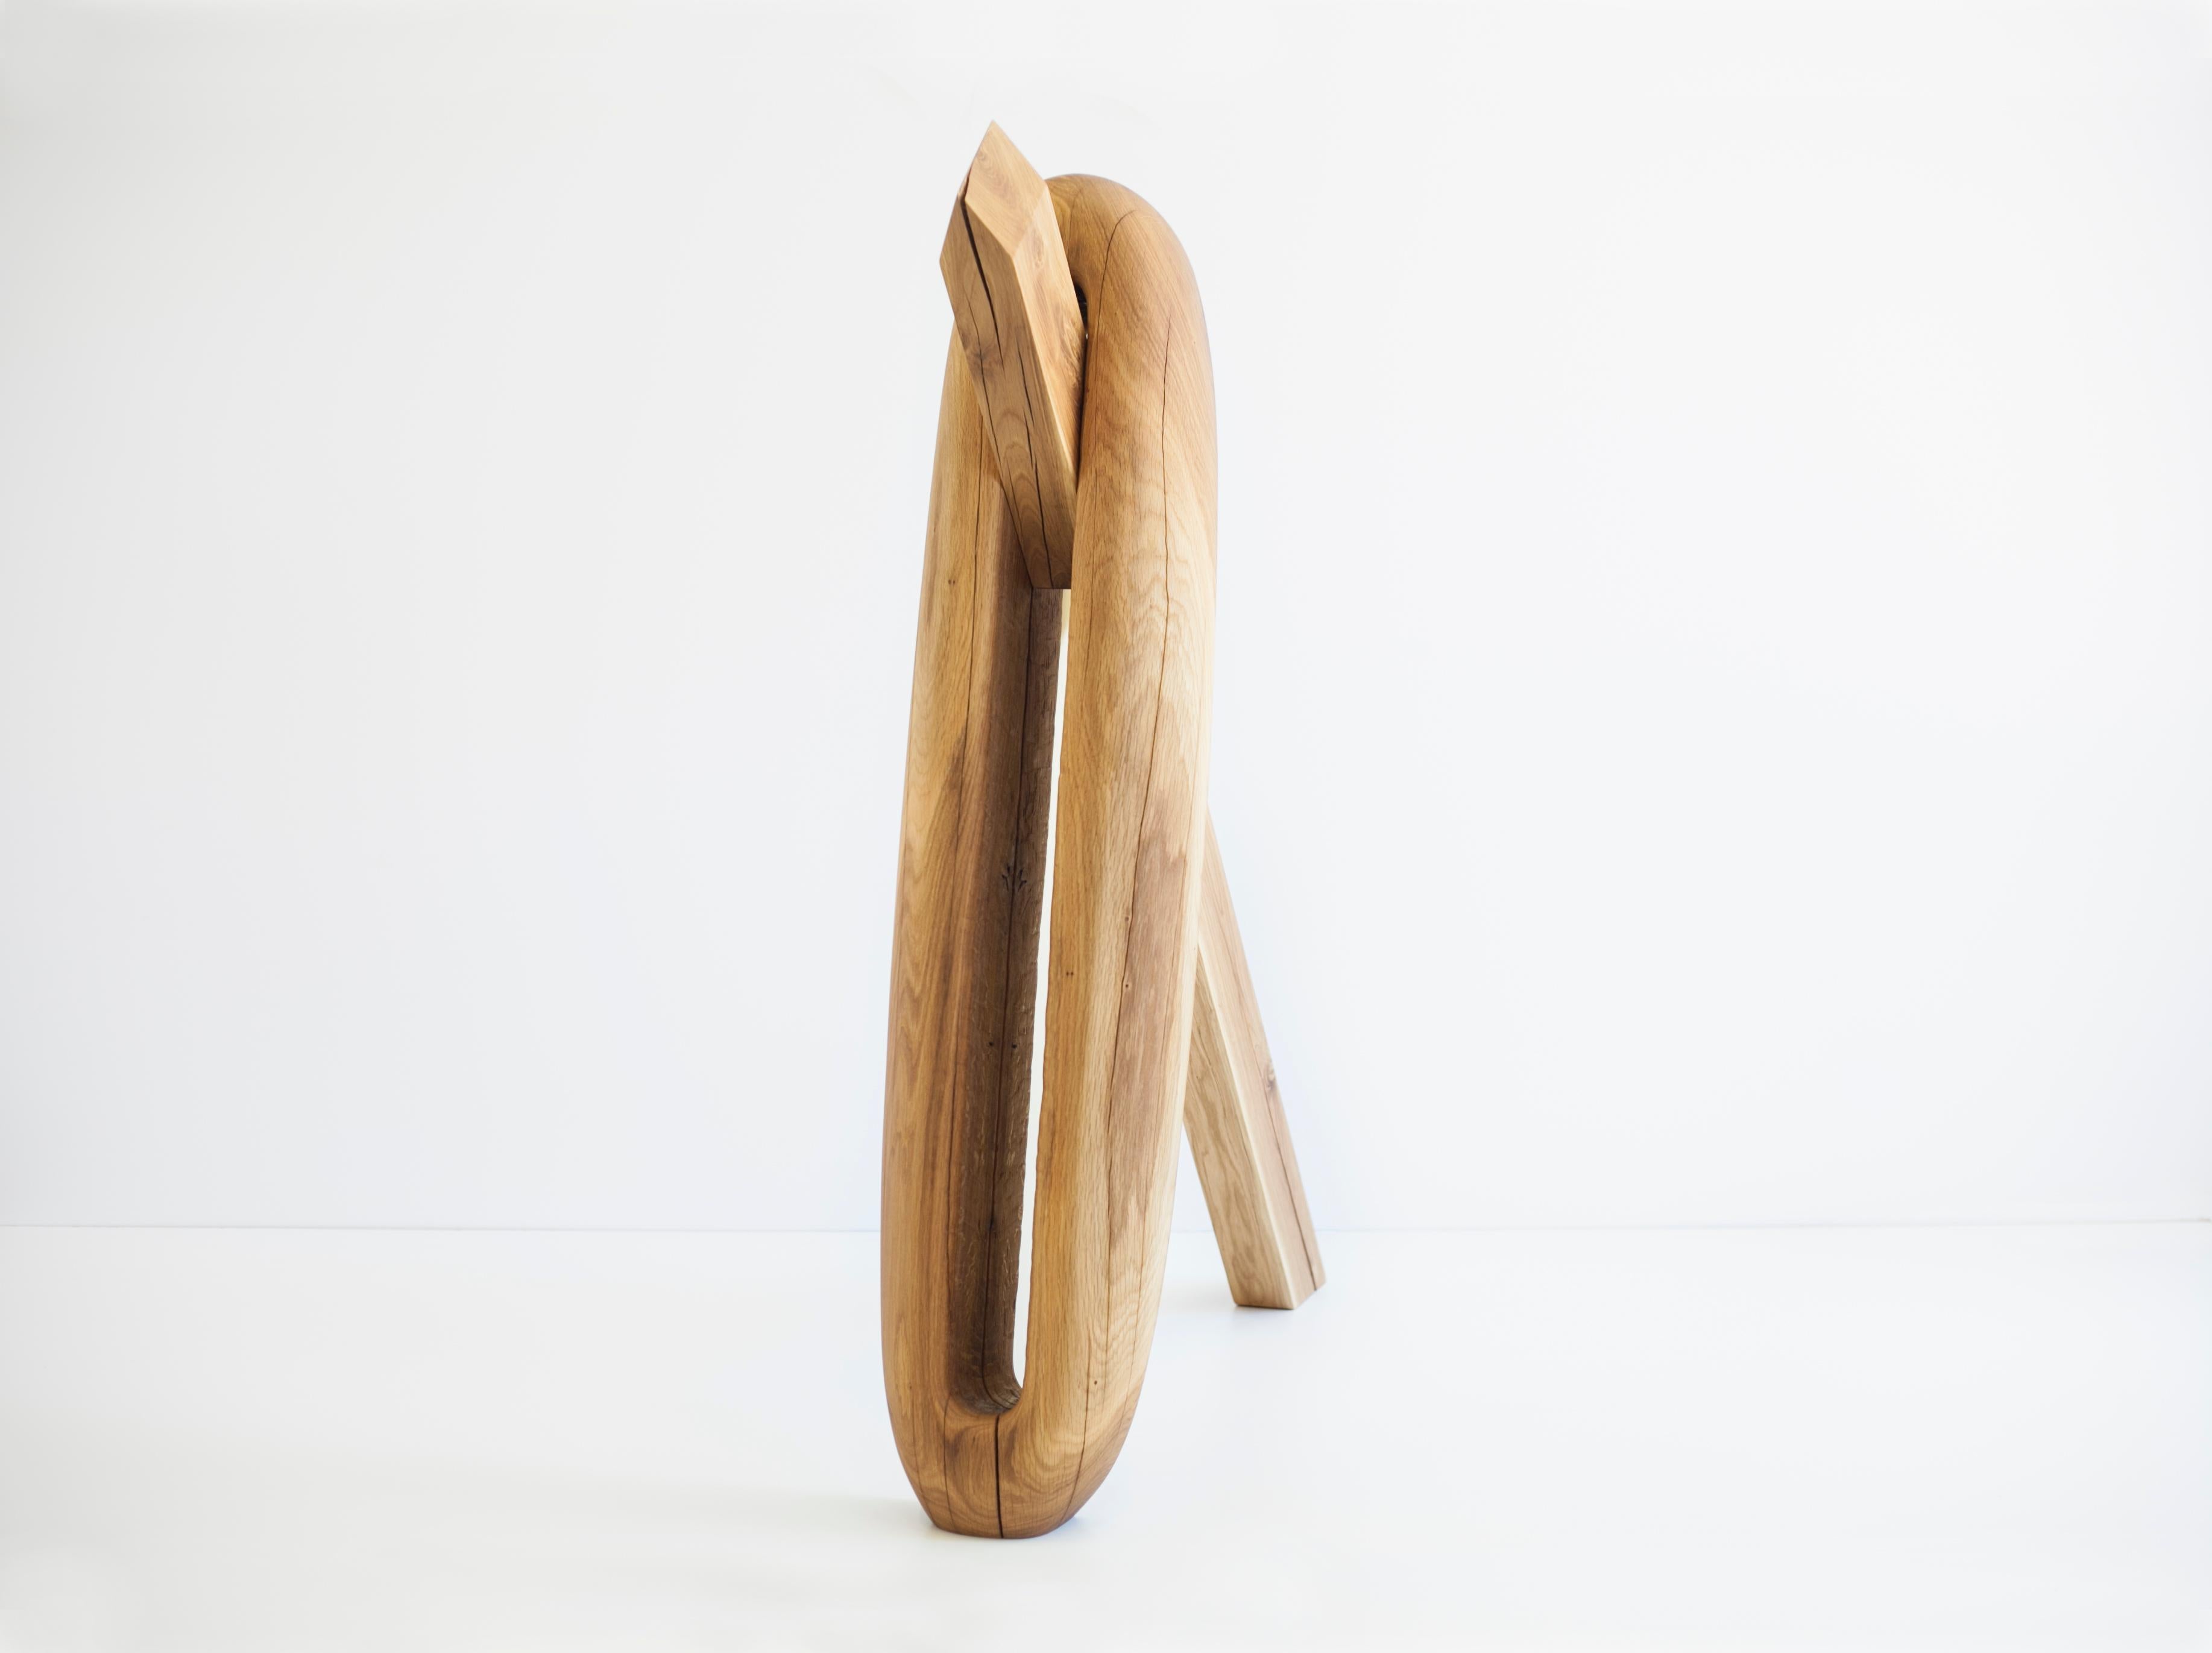 Anna Bera CD N29 by Nów
Designed by Anna Bera
Dimensions: D 110 x W 27 x H 121 cm
Materials: oak wood

As an artist, woodcarver and carpenter, Anna creates wooden furniture pieces, mainly storages and cabinets crafted by hand in limited